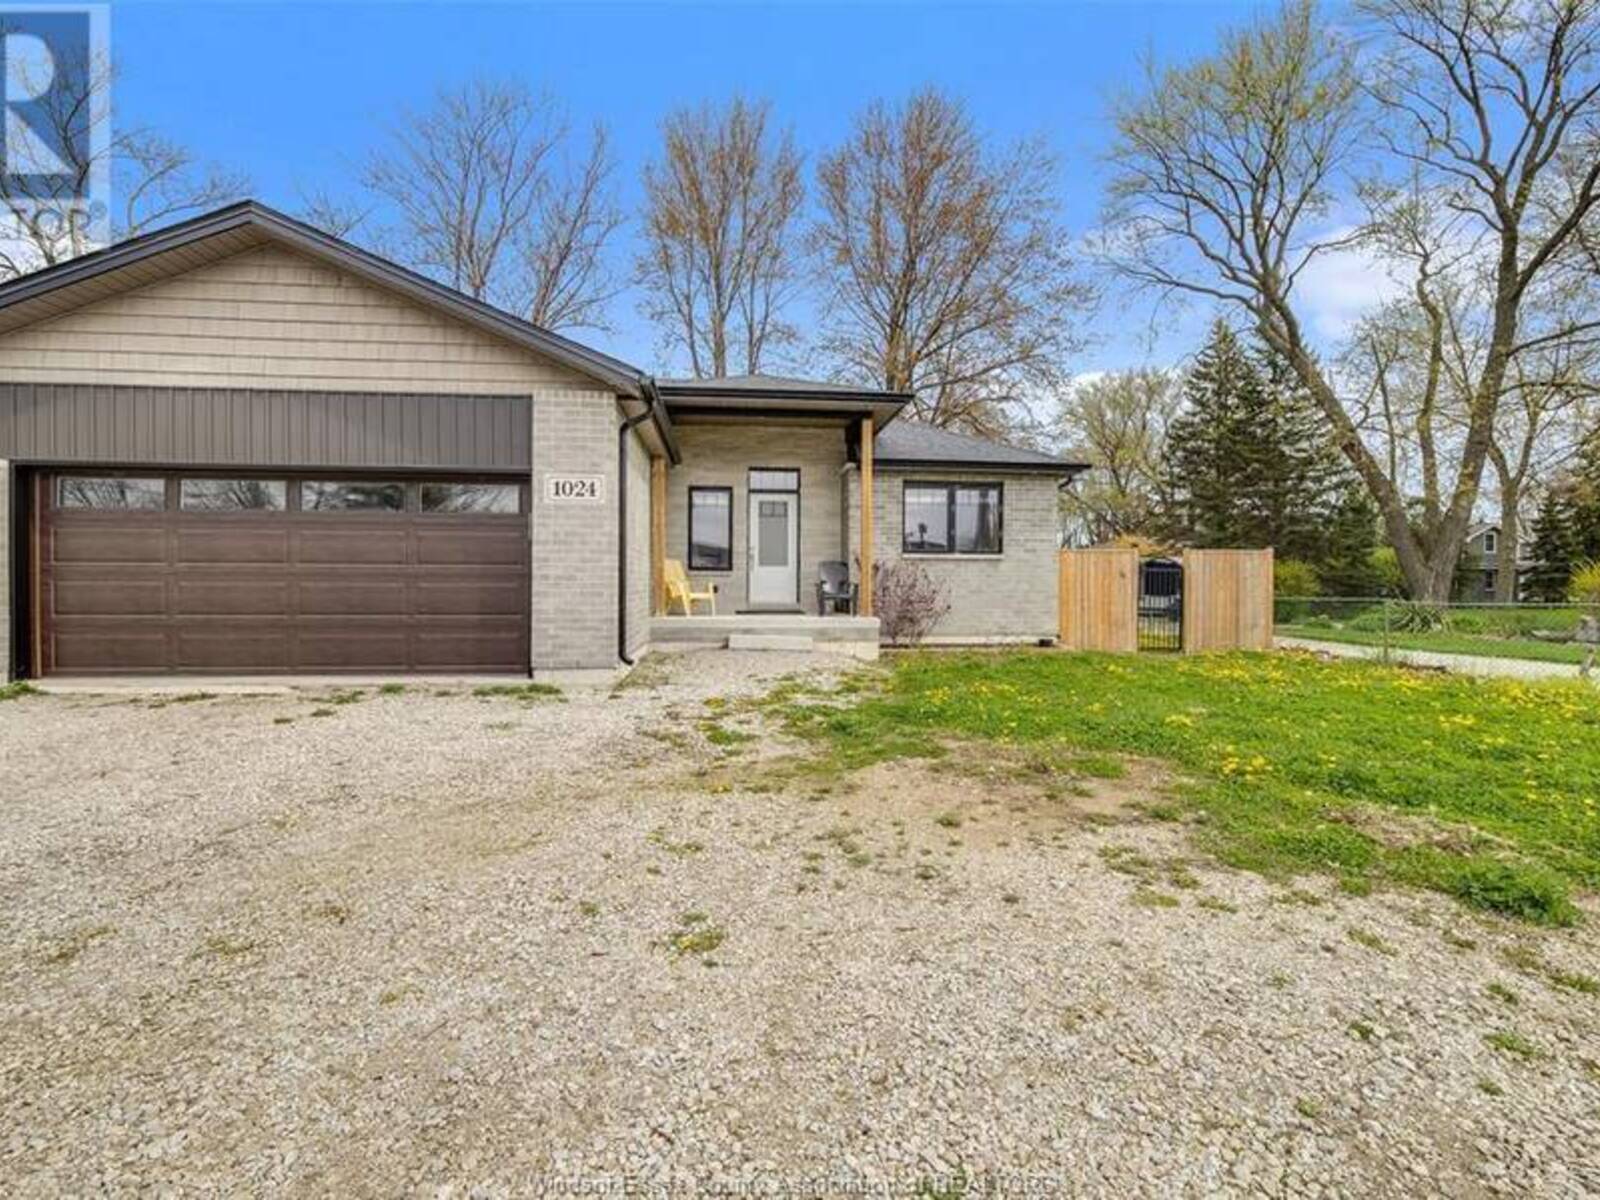 1024 COUNTY RD 22, Lakeshore, Ontario N0R 1A0